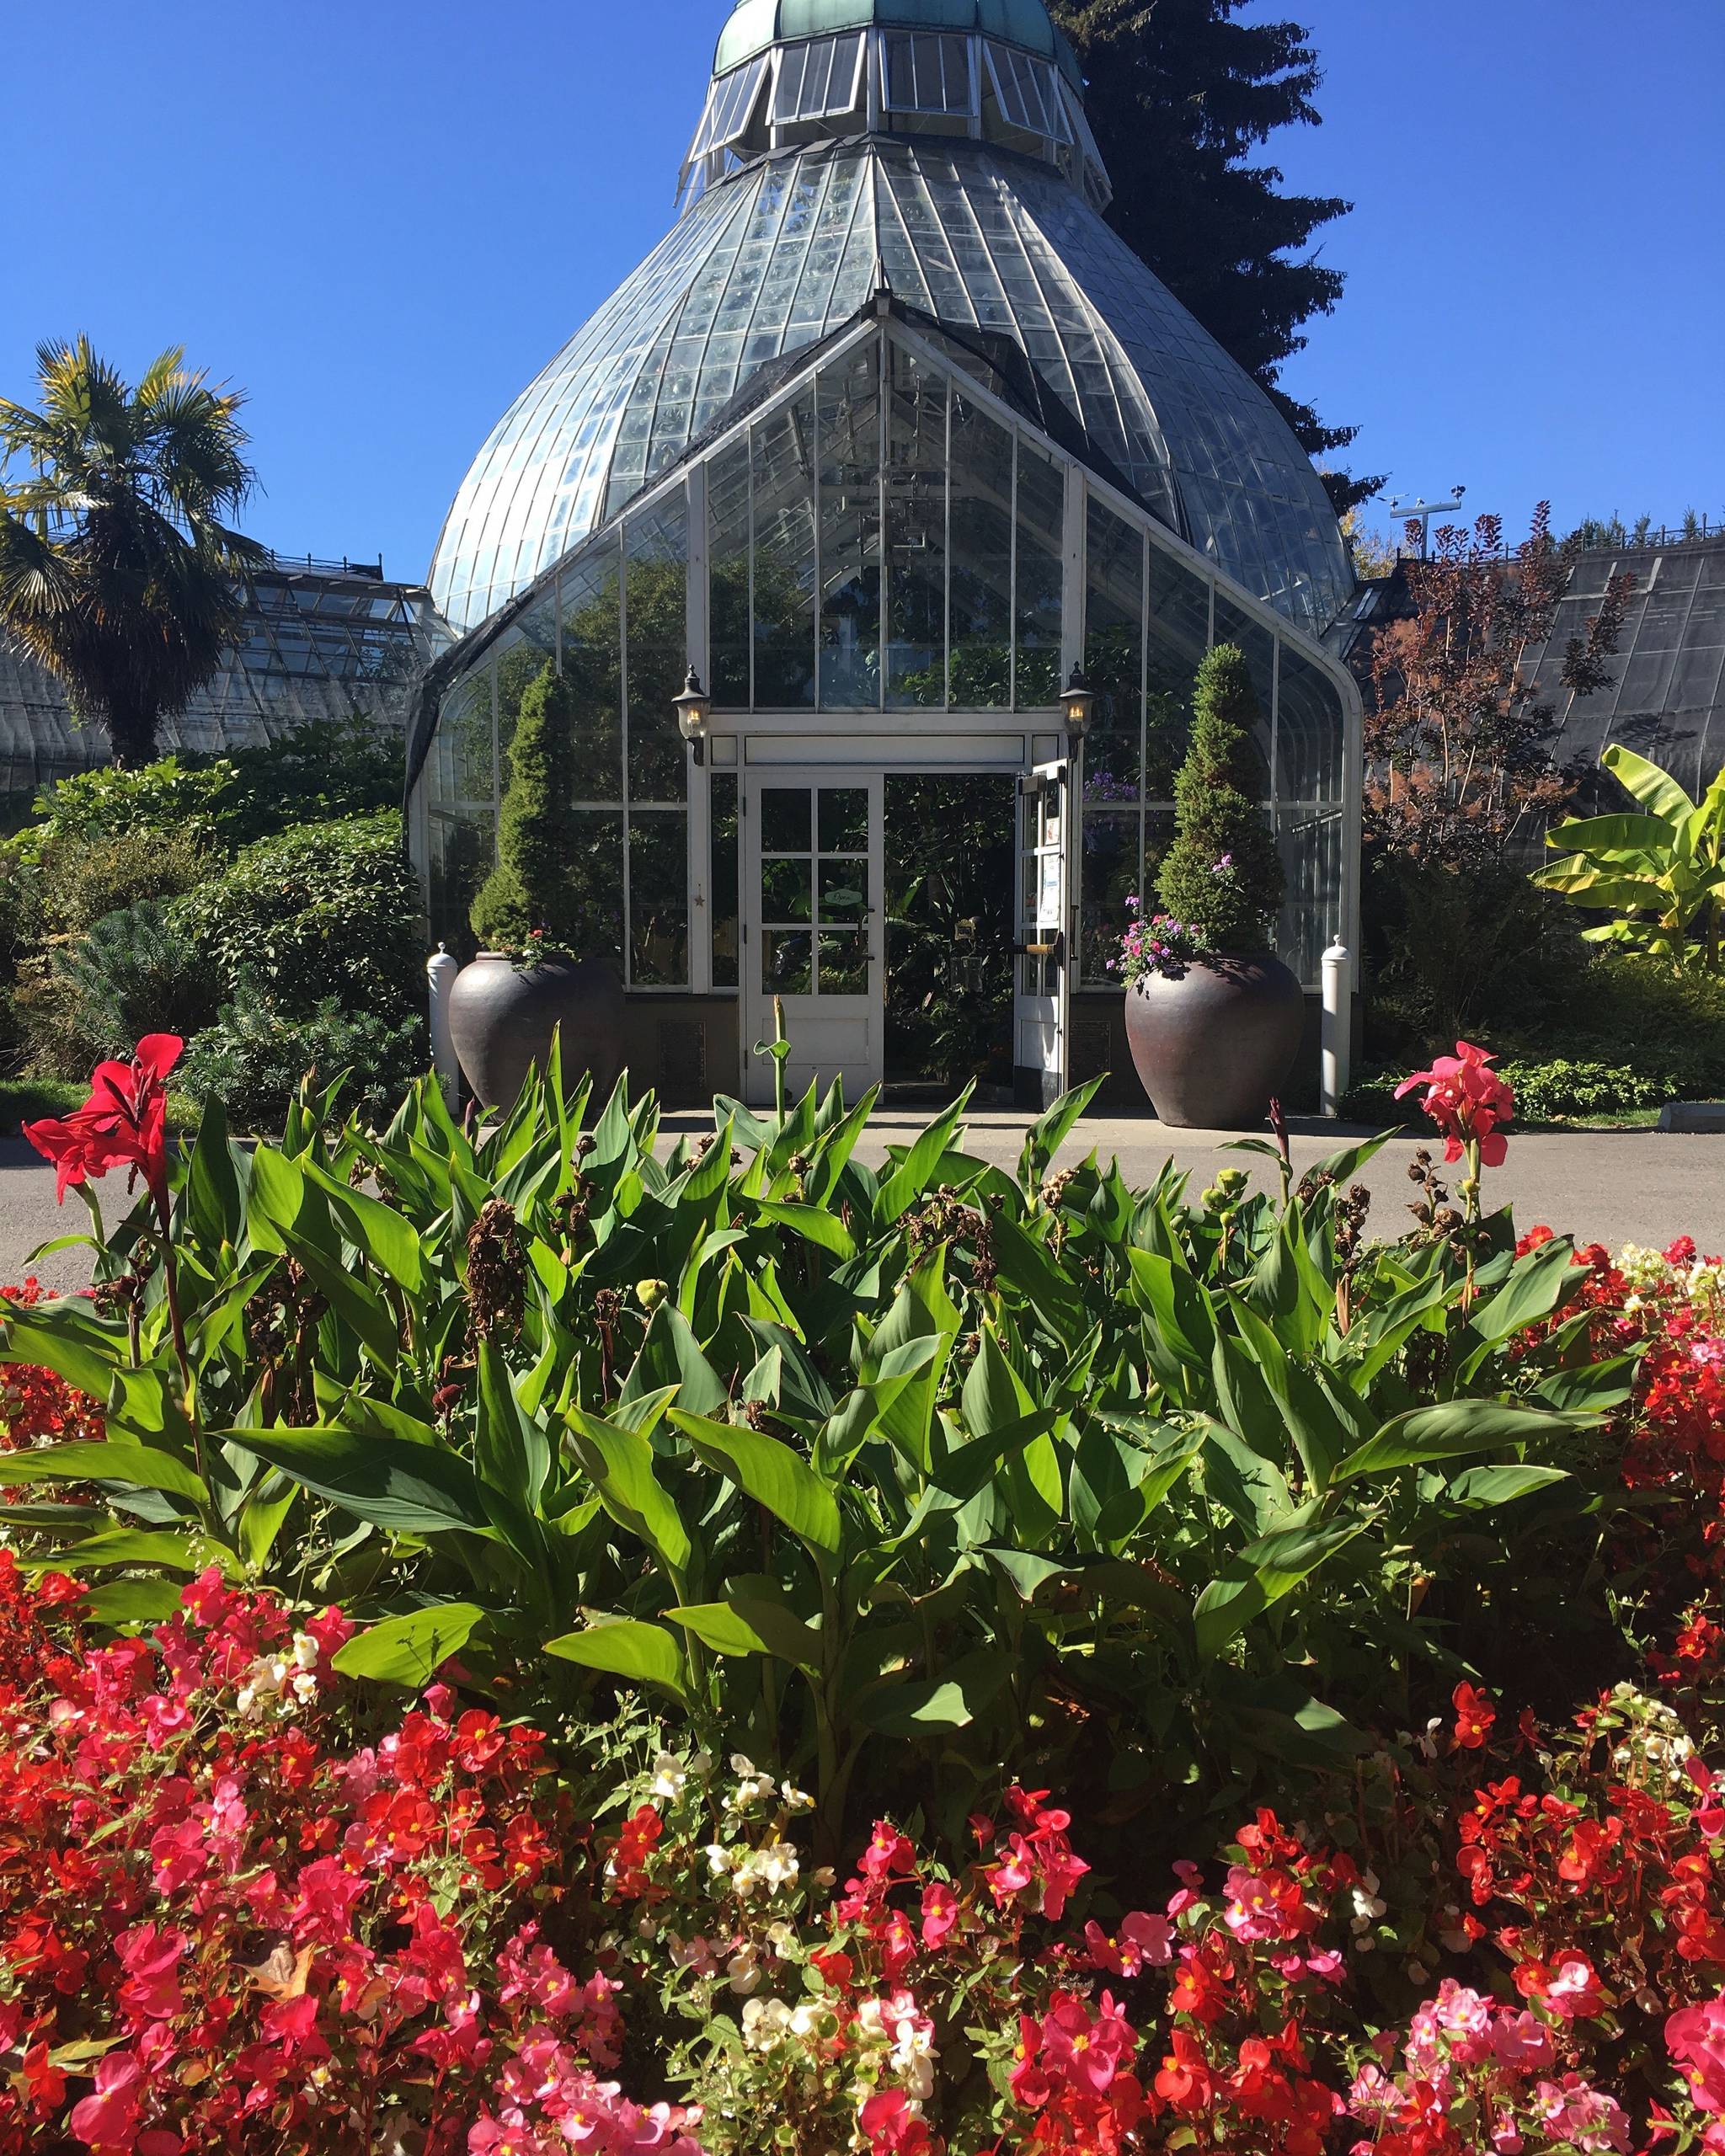 With more than 250 species of exotic plants and seasonal floral displays, the W.W. Seymour Botanical Conservatory is a much-loved sanctuary for plants and people.